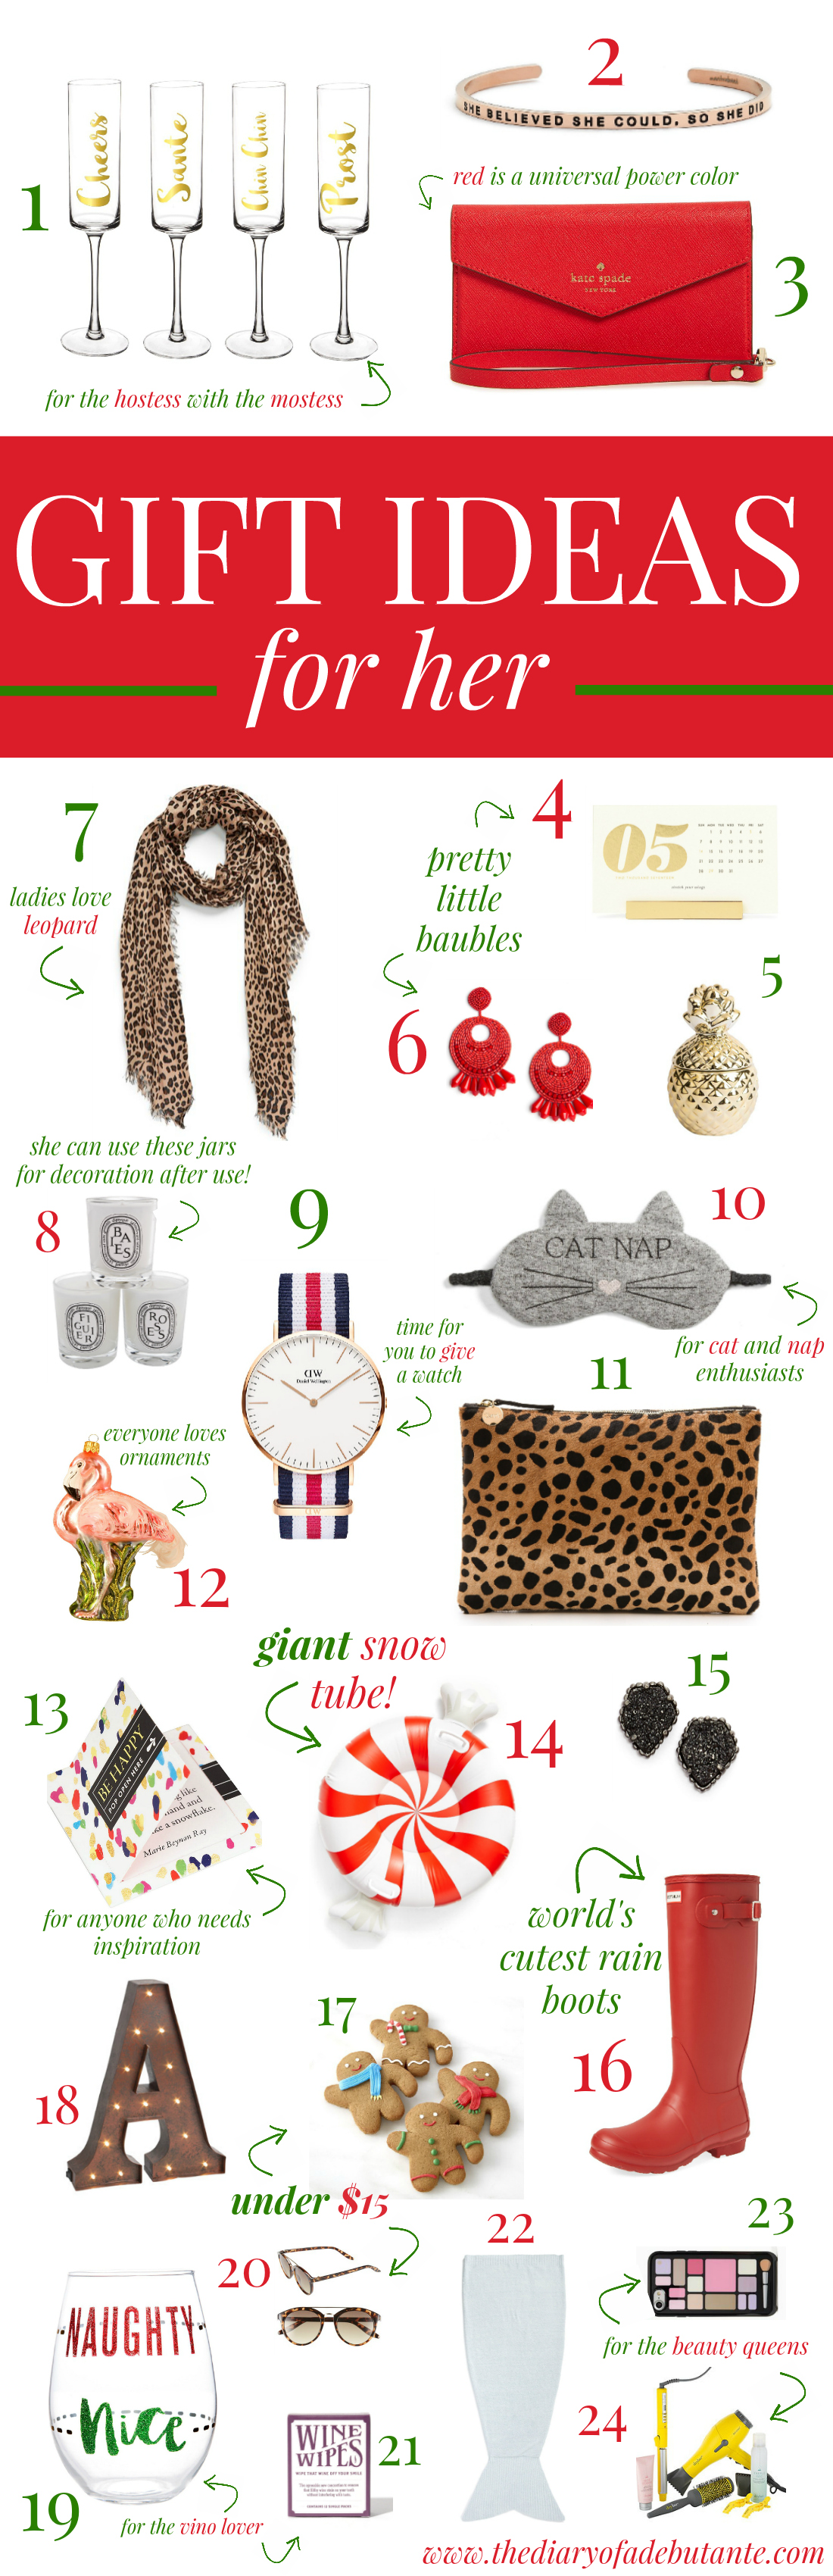 The best Christmas gift ideas for her in 2016